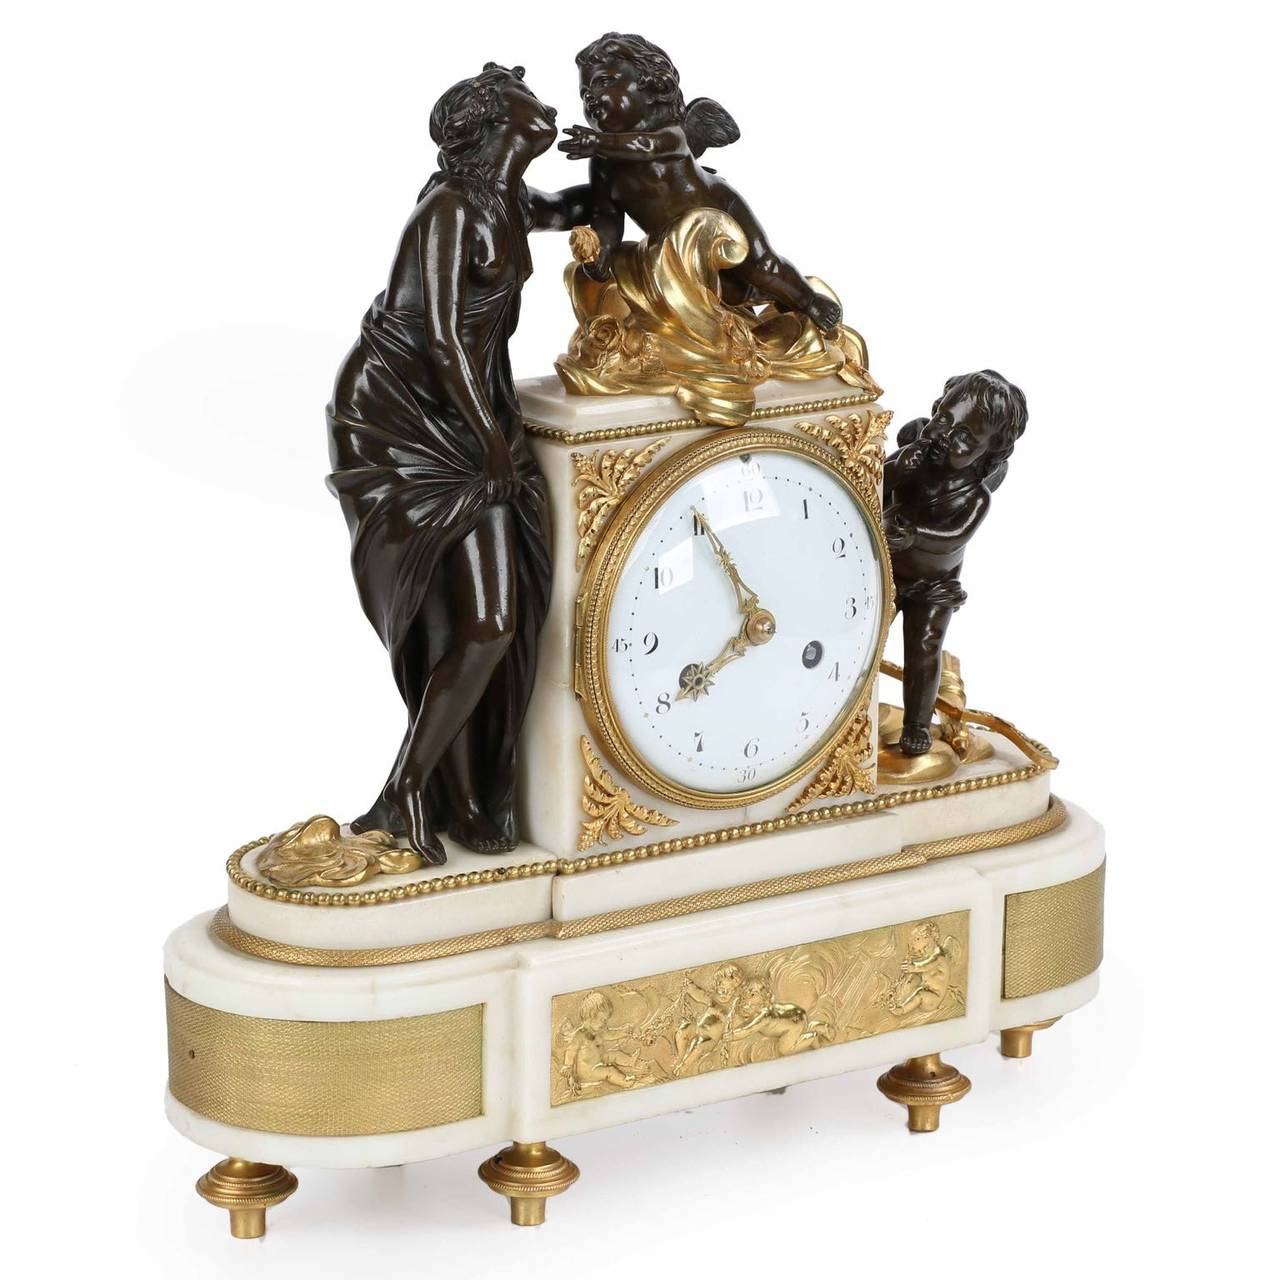 A precious piece crafted with utmost attention to detail in every surface, this Fine timepiece exhibits a level of skill in the bronze casting that is unsurpassed. Some of the most difficult aspects of casting are eyelids, strands of hair and